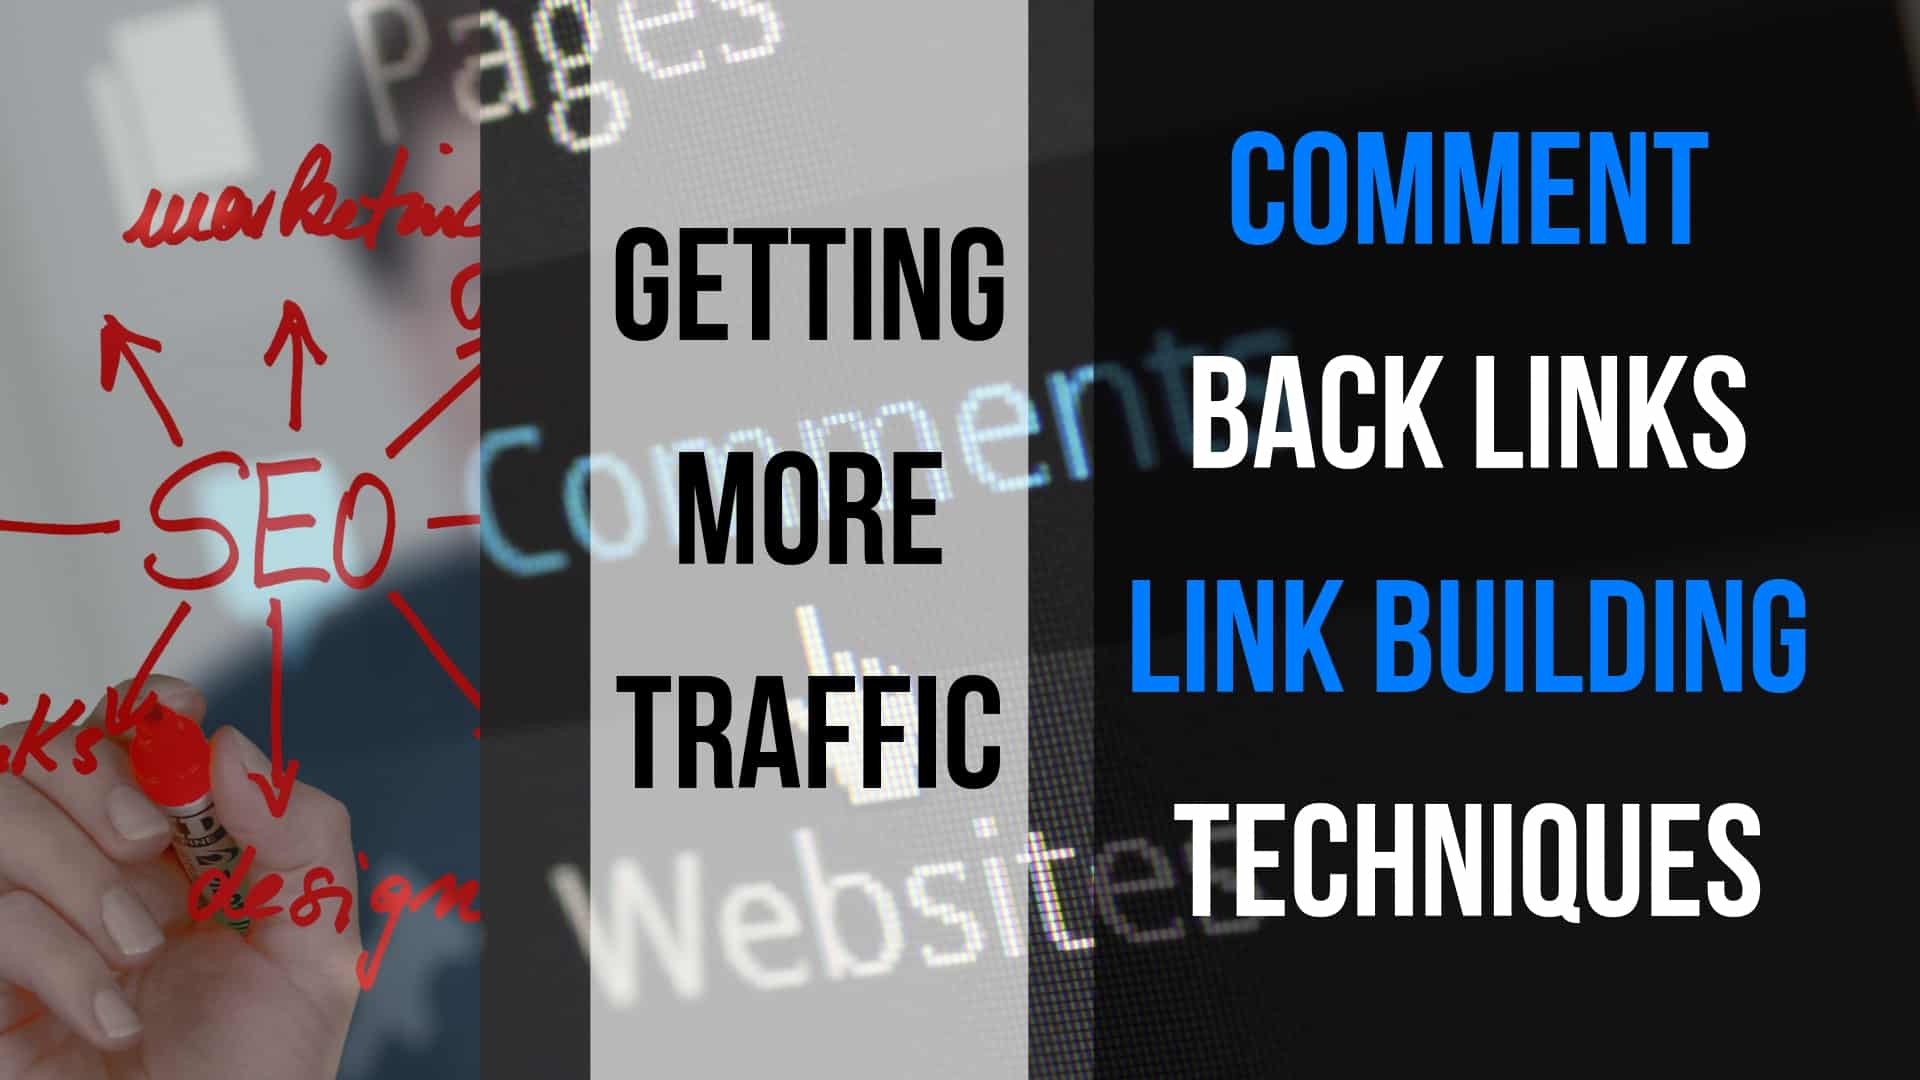 Comment back links and link building techniques